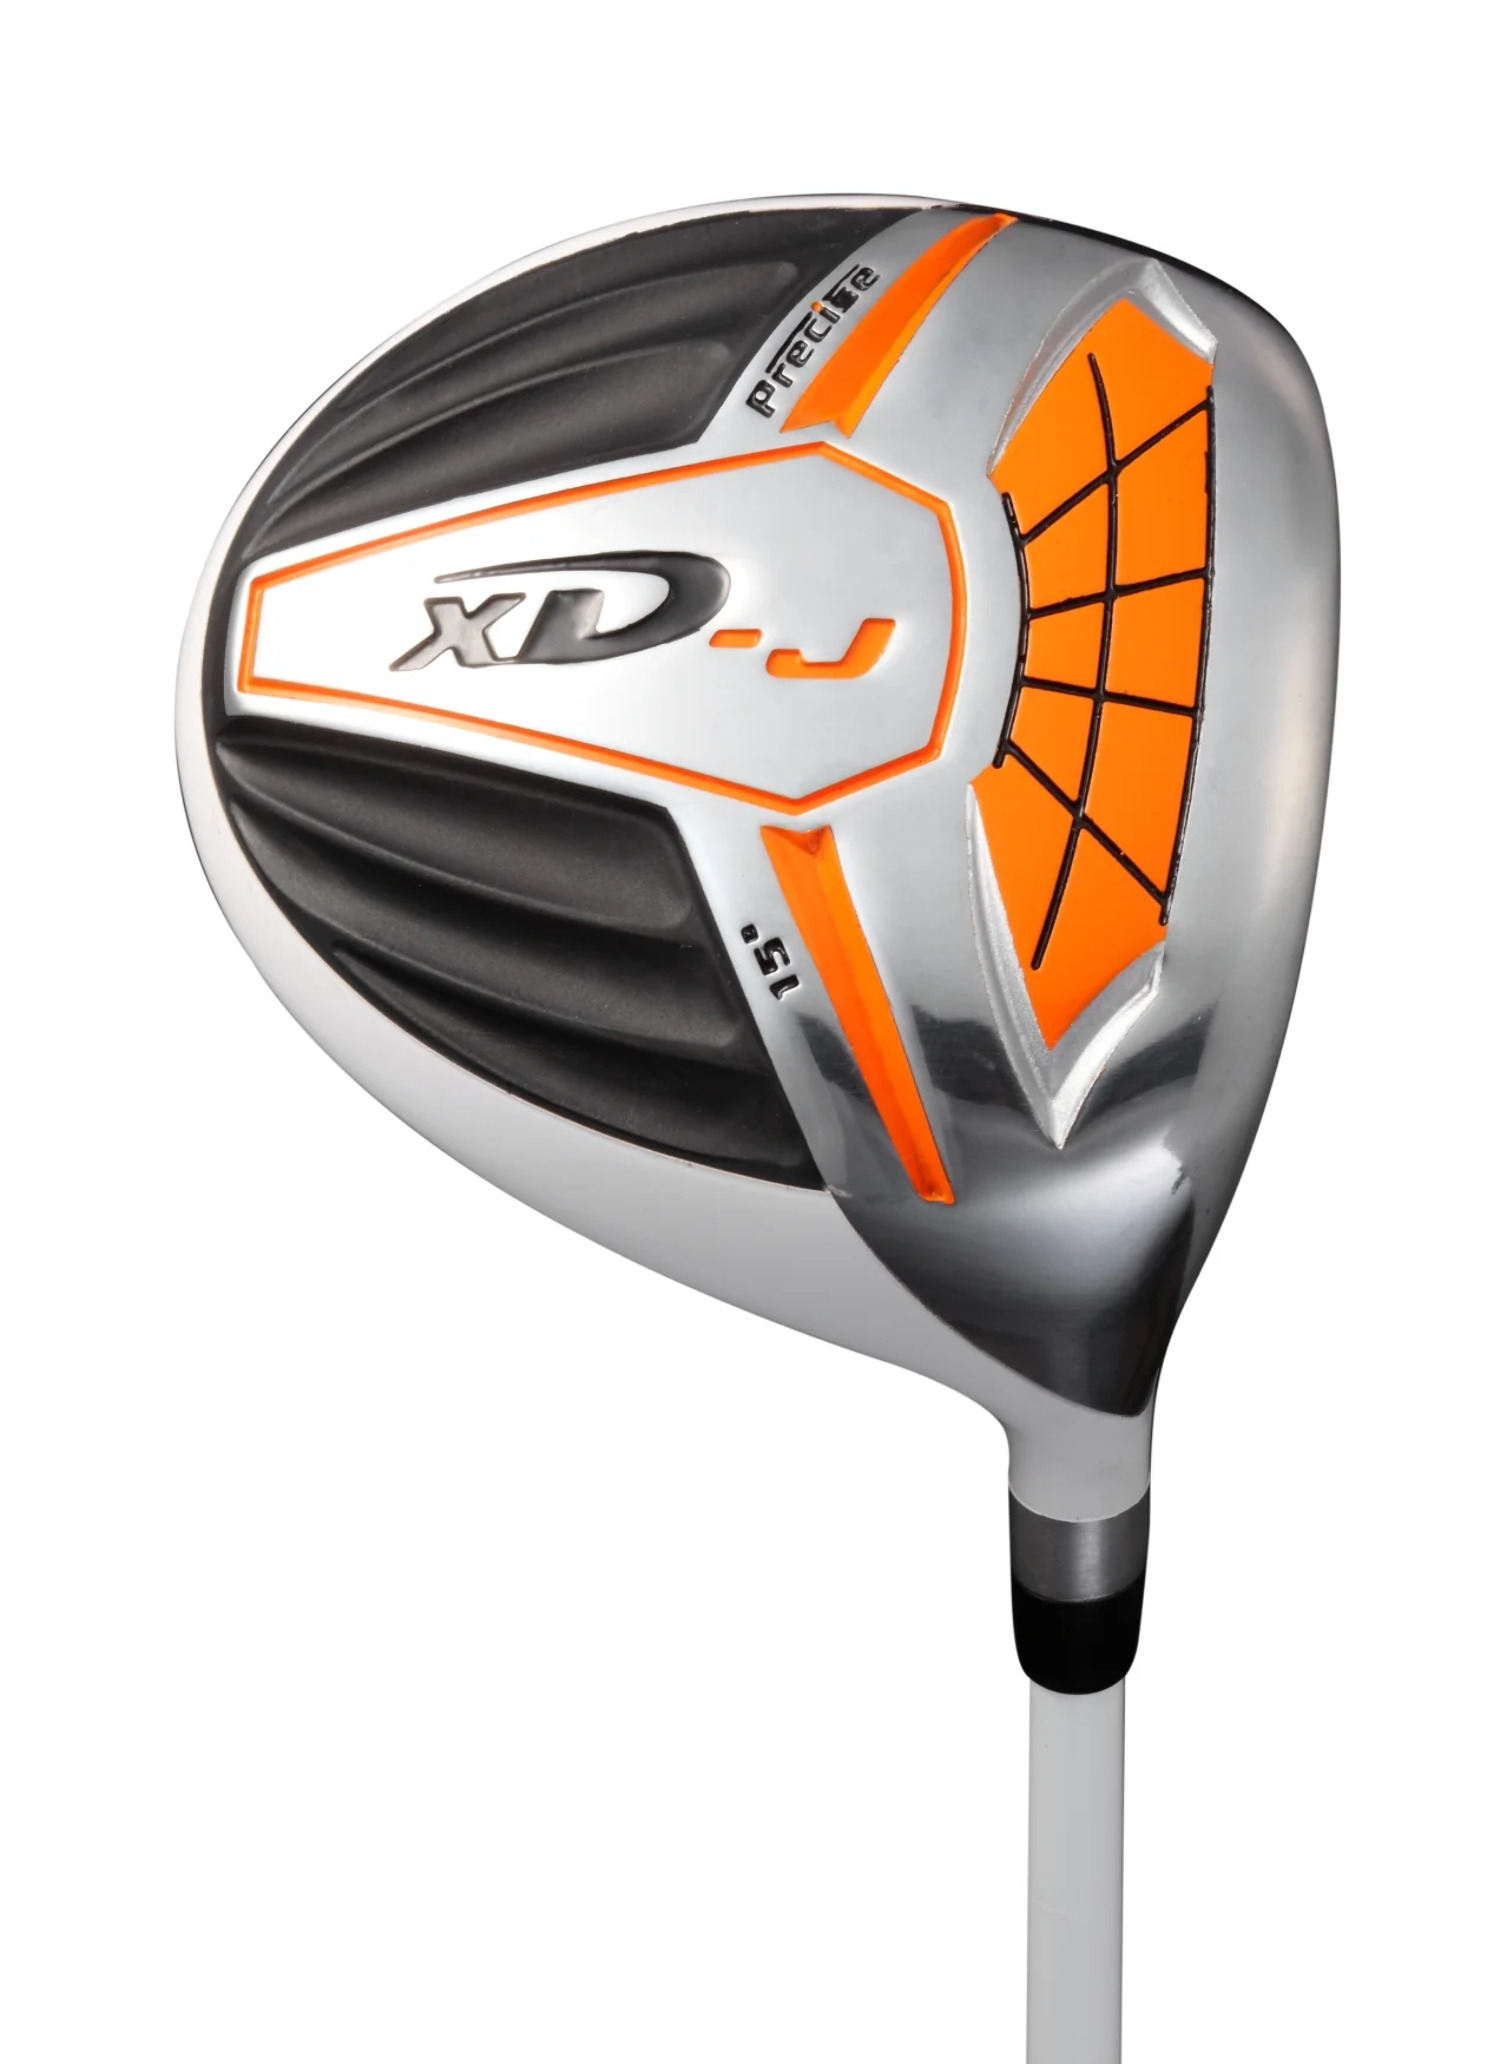 Precise XD-J Junior Complete Golf Club Set for Children Kids - 3 Age Groups Boys & Girls - Right Hand & Left Hand! - image 3 of 11